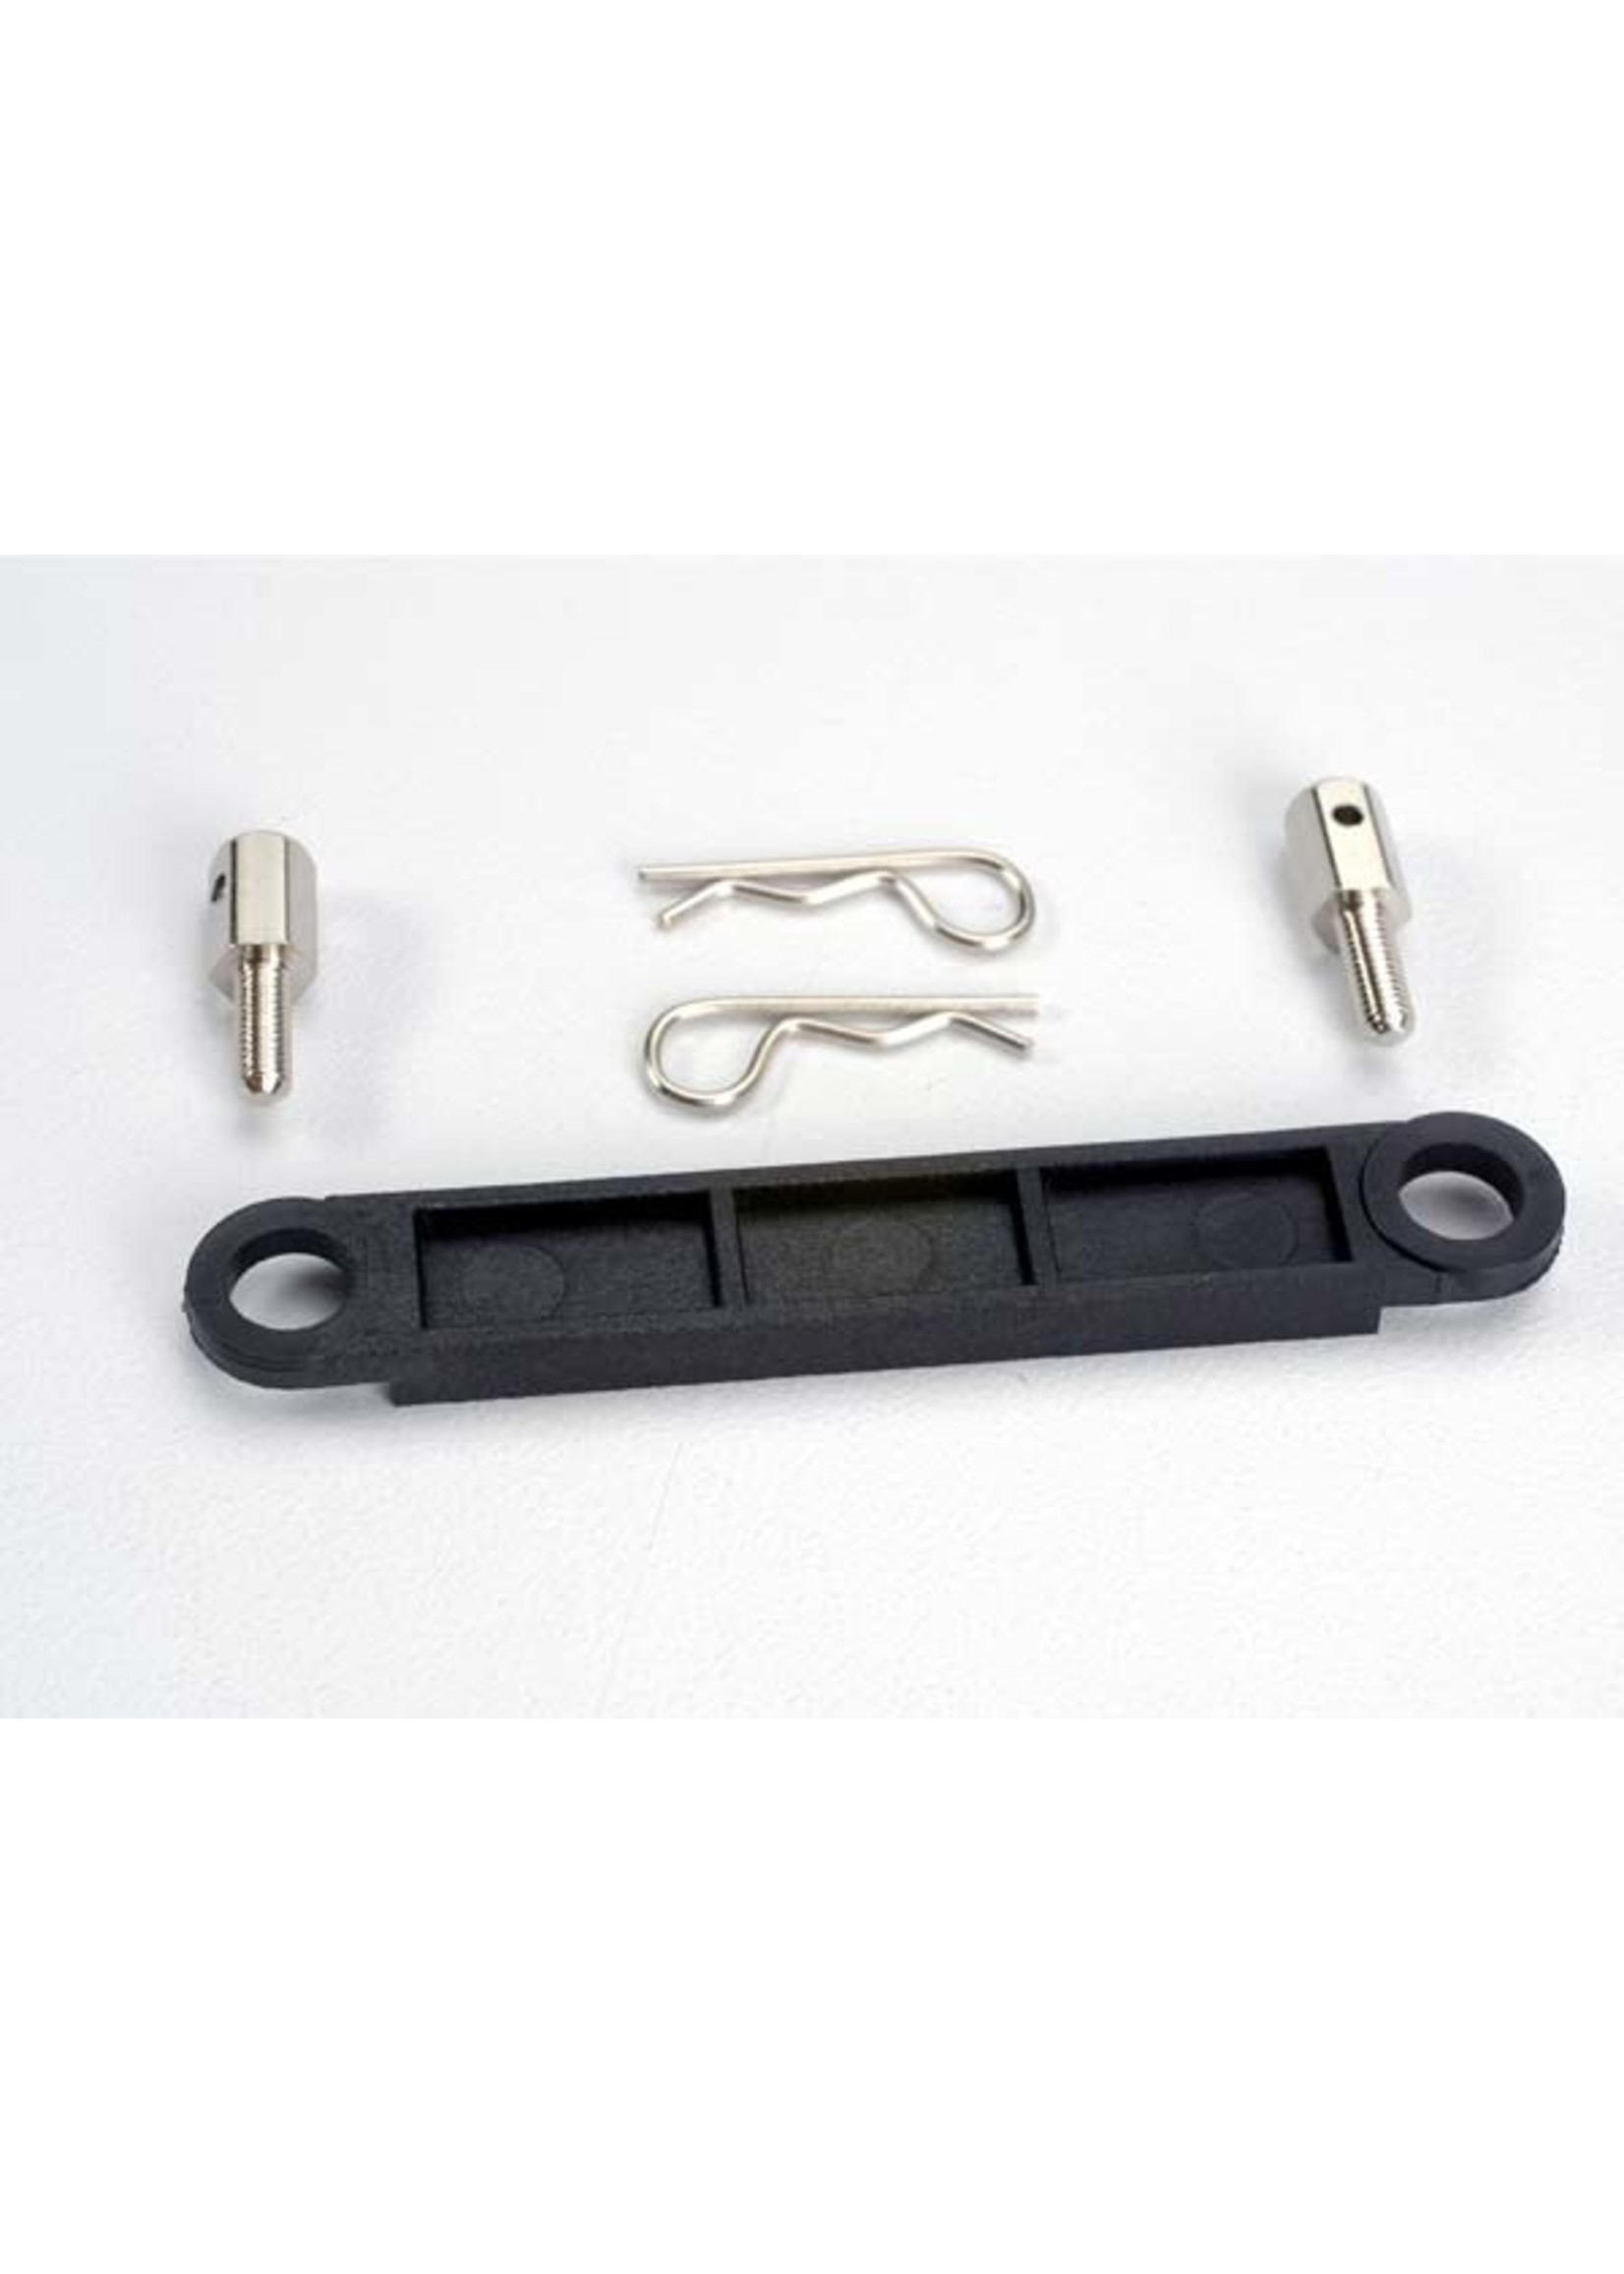 Traxxas 3727 - Battery Hold-Down Plate - Black